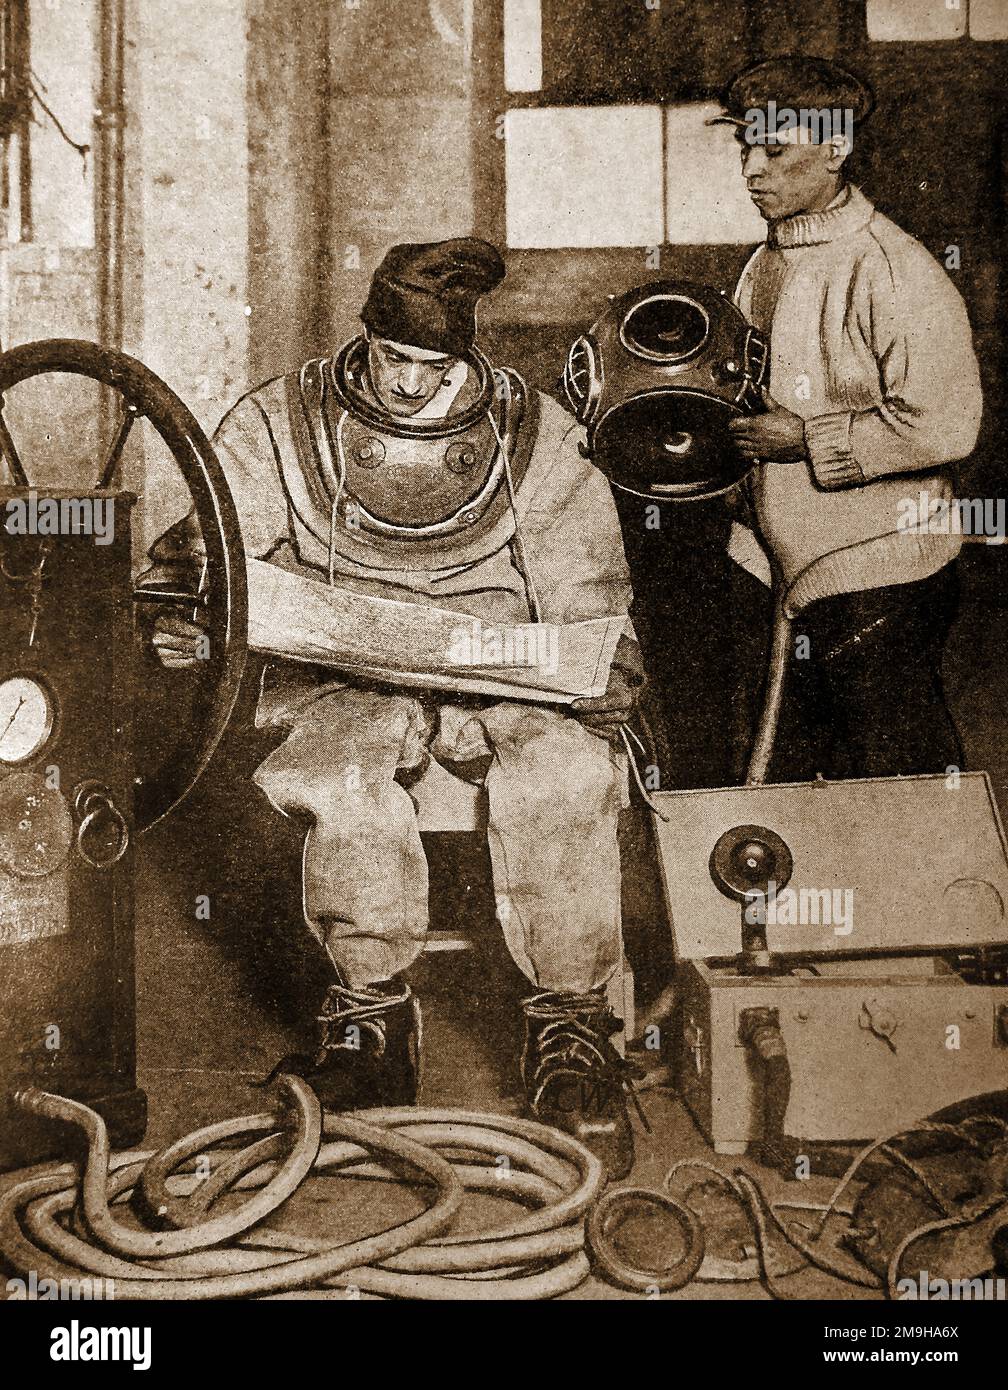 A 1930 British diver with his equipment including telephone, air pump, heavy weights etc.. Stock Photo